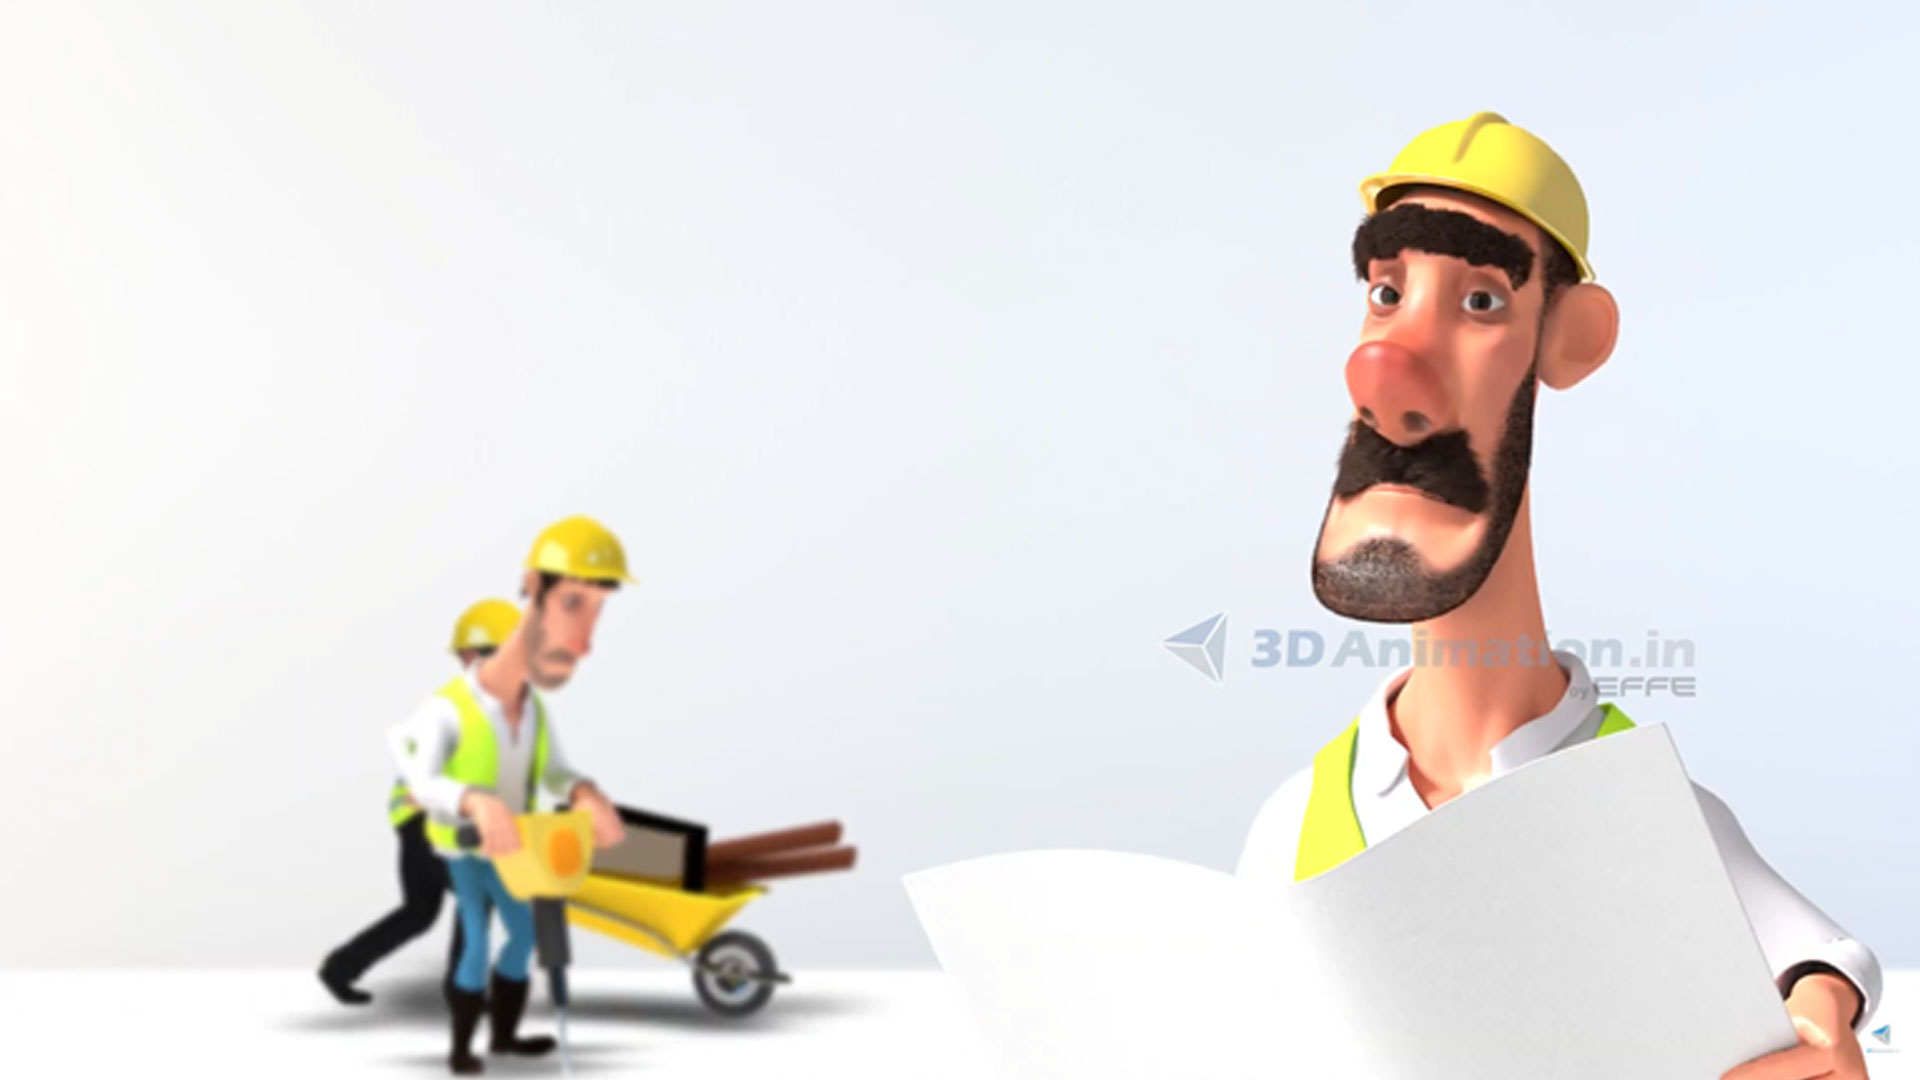 Industrial Safety Moment Videos | Safety Animation Video Studio | 3D  Animation Video | EFFE Animation